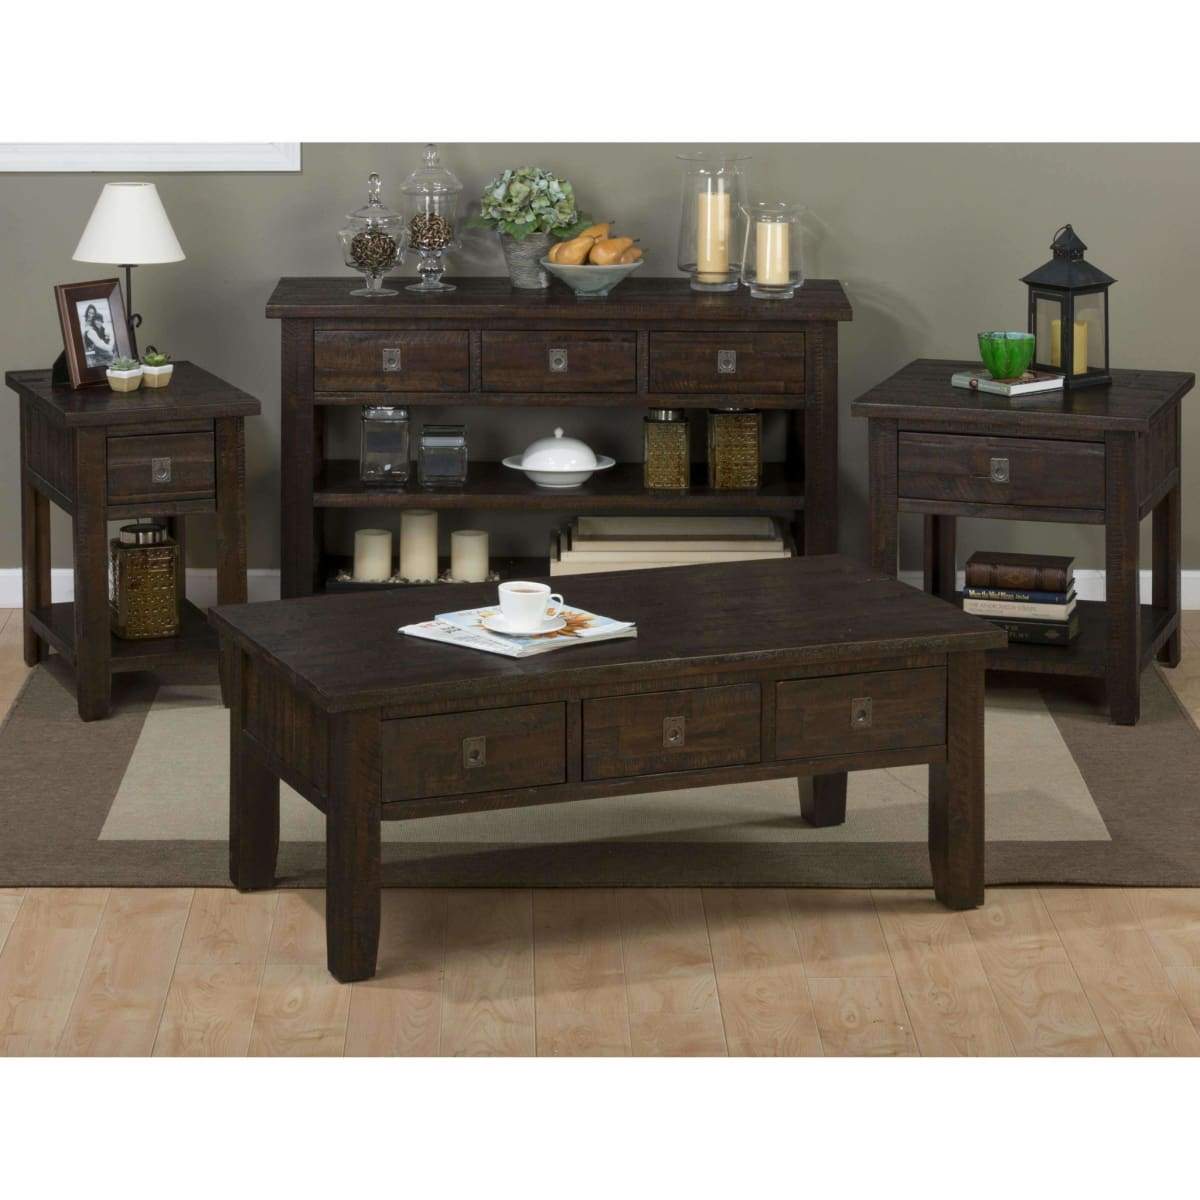 Kona Grove Square End Table - END TABLE/SIDE TABLE